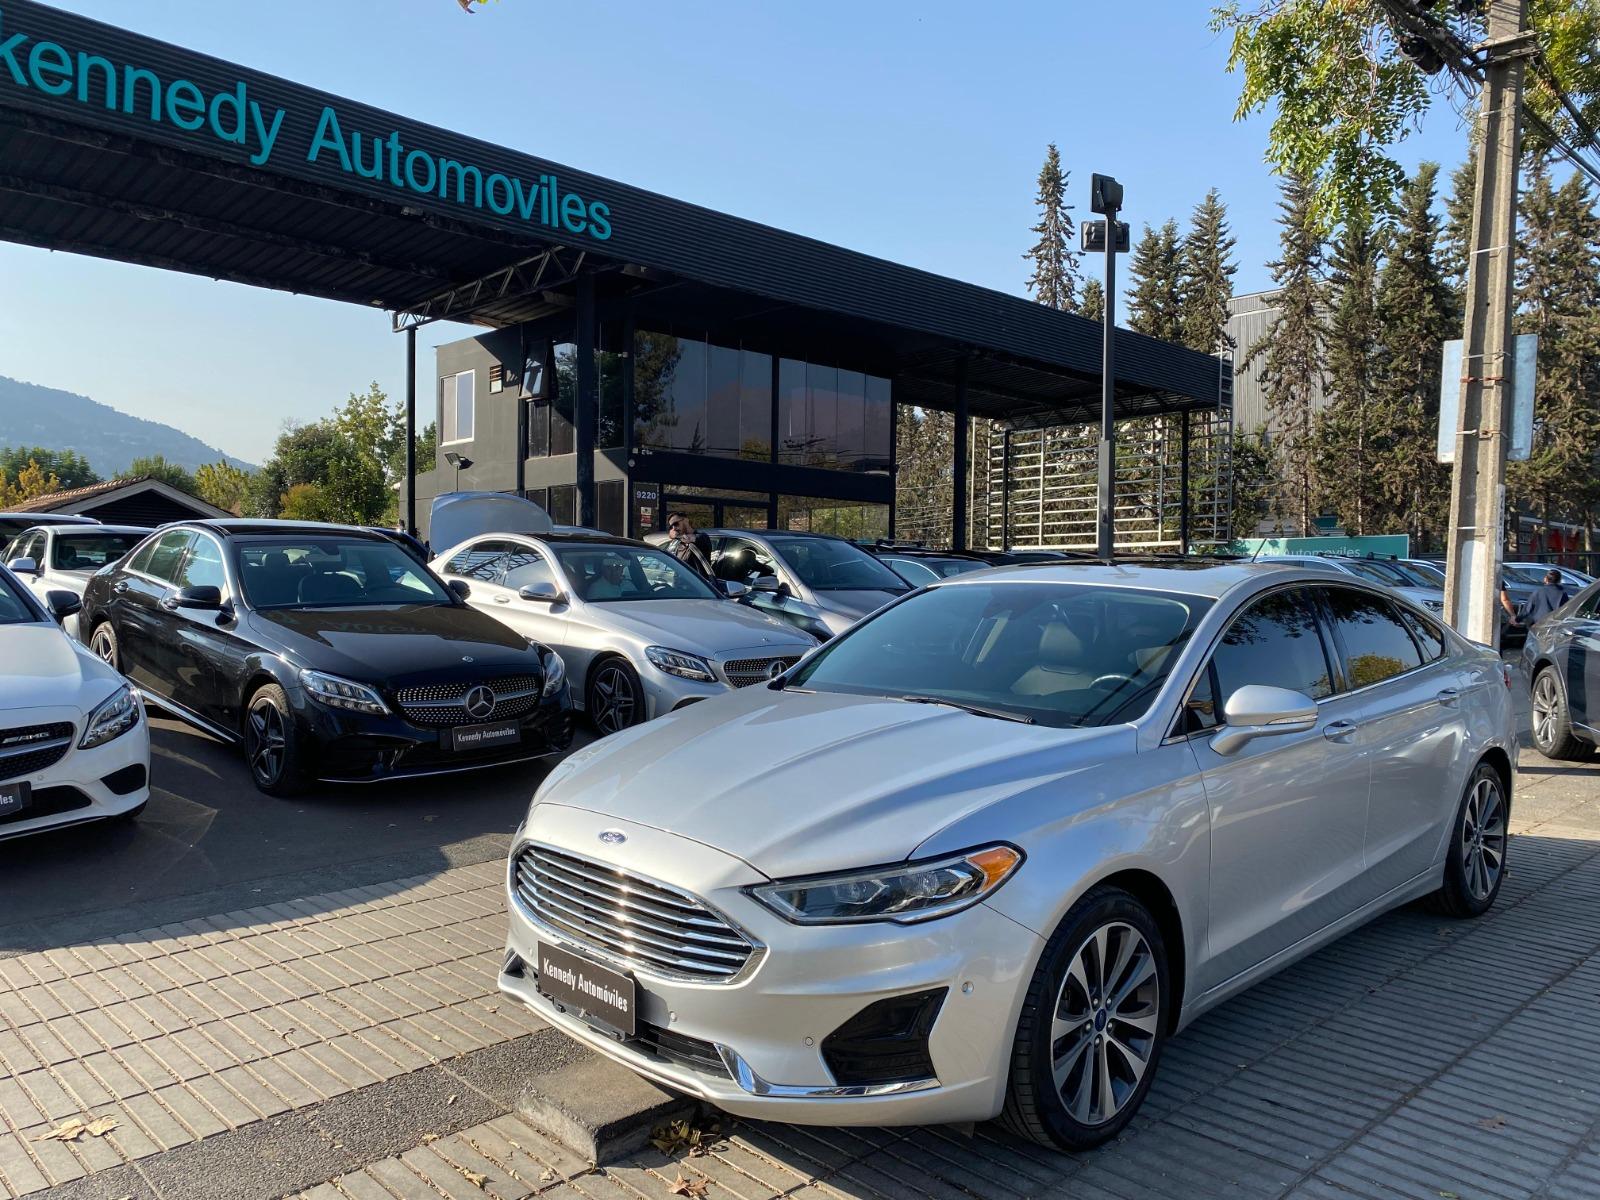 FORD FUSION 2.0 ECOBOOST  SEL AUTO 2020 OPORTUNIDAD  - KENNEDY AUTOMOVILES